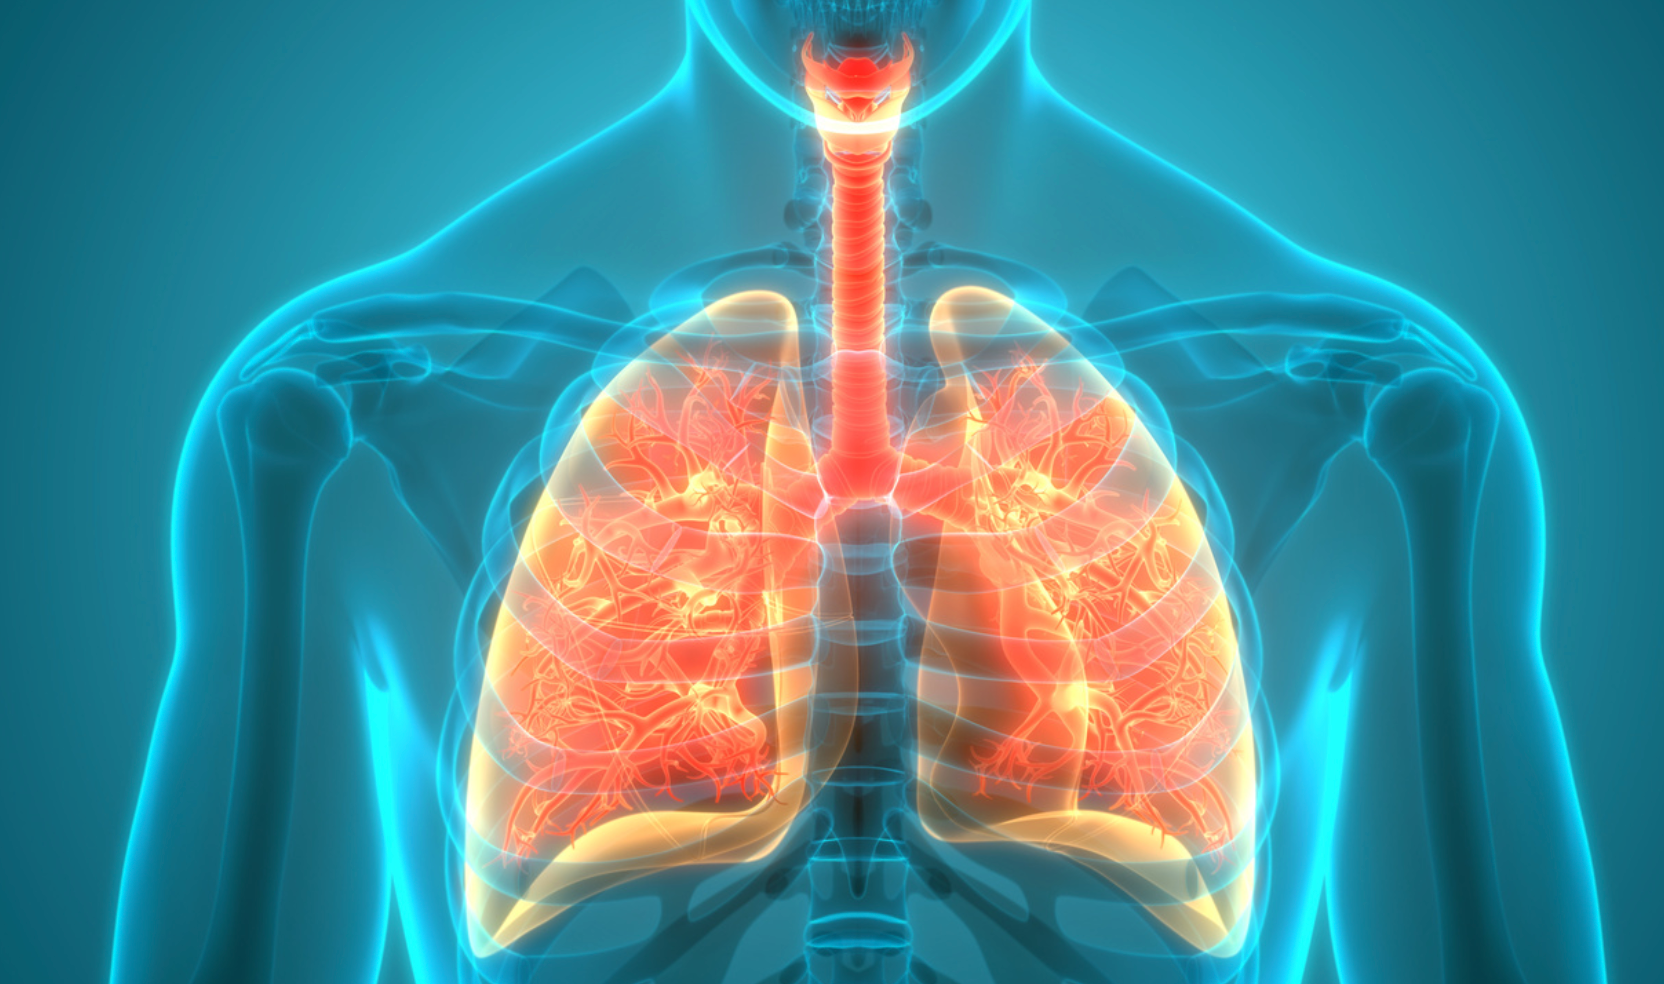 FDA Accepts NDA for Adagrasib for Non-Small Cell Lung Cancer